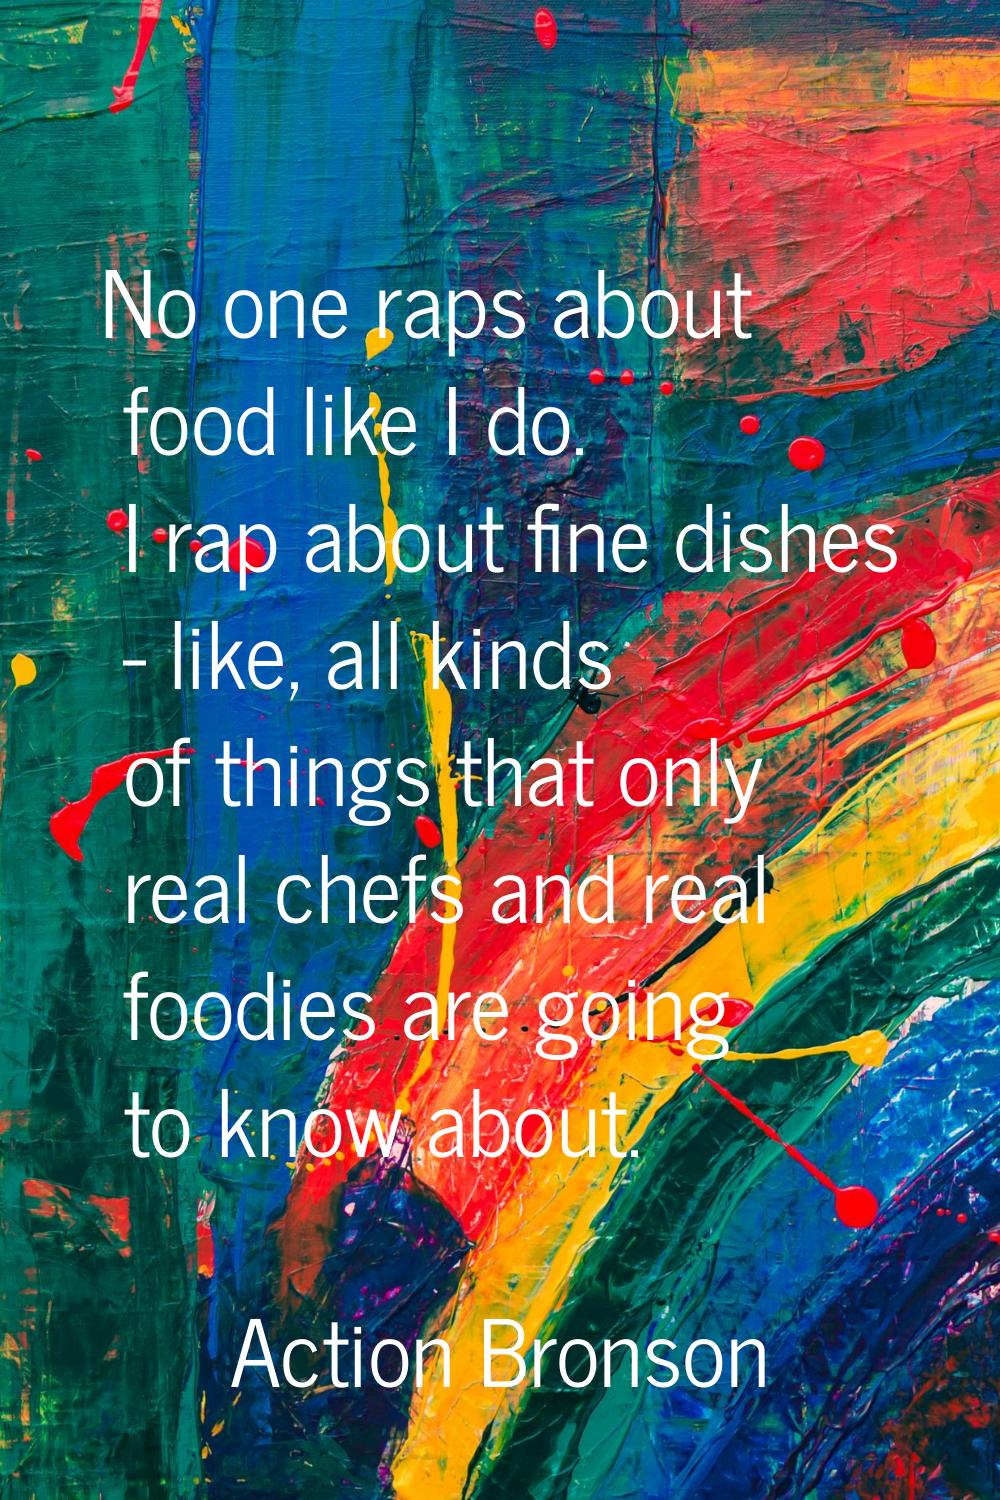 No one raps about food like I do. I rap about fine dishes - like, all kinds of things that only rea